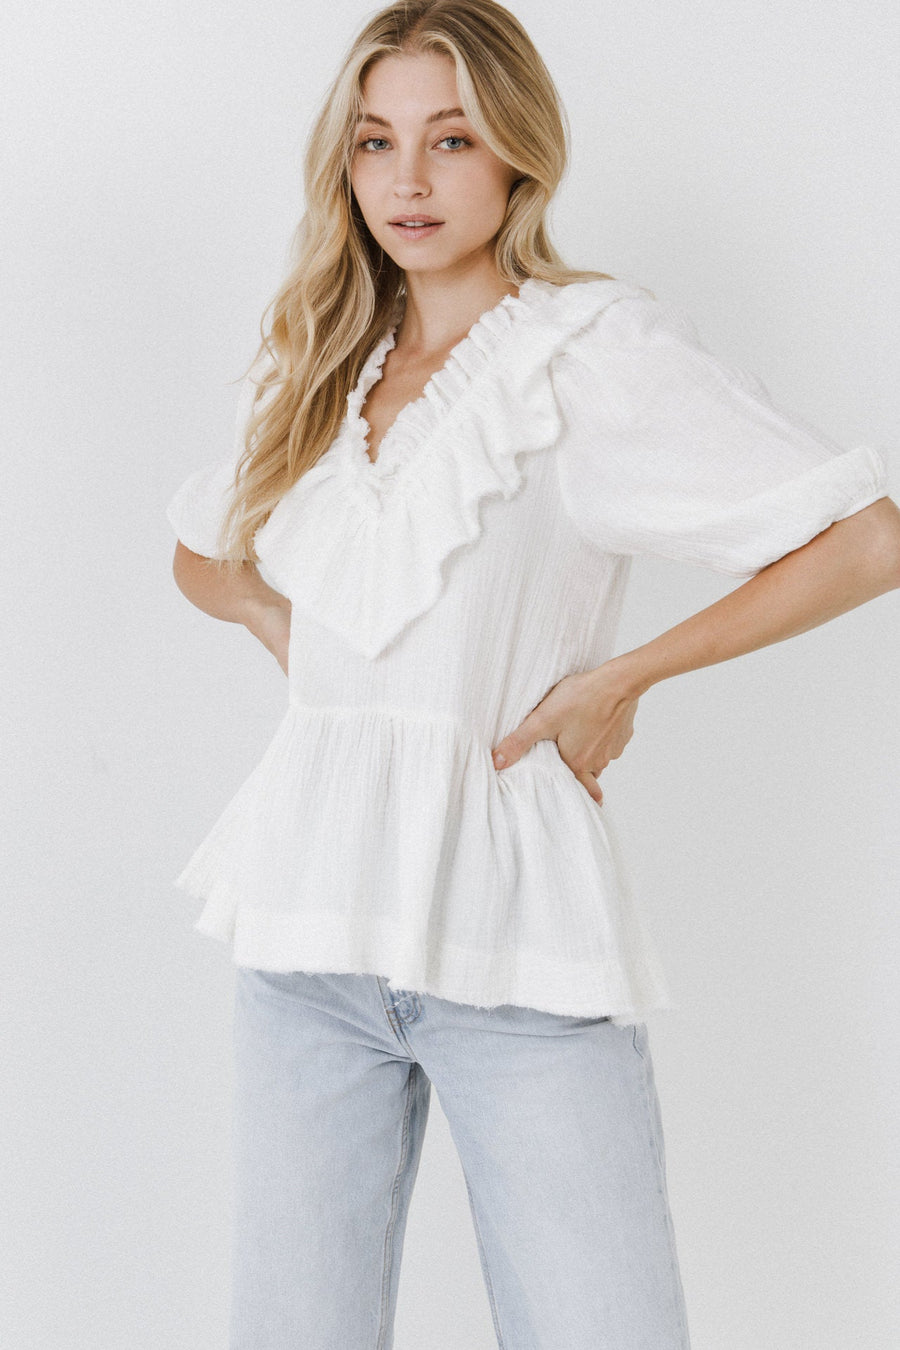 FREE THE ROSES-Ruffle Neckline Blouse-BLOUSES available at Objectrare